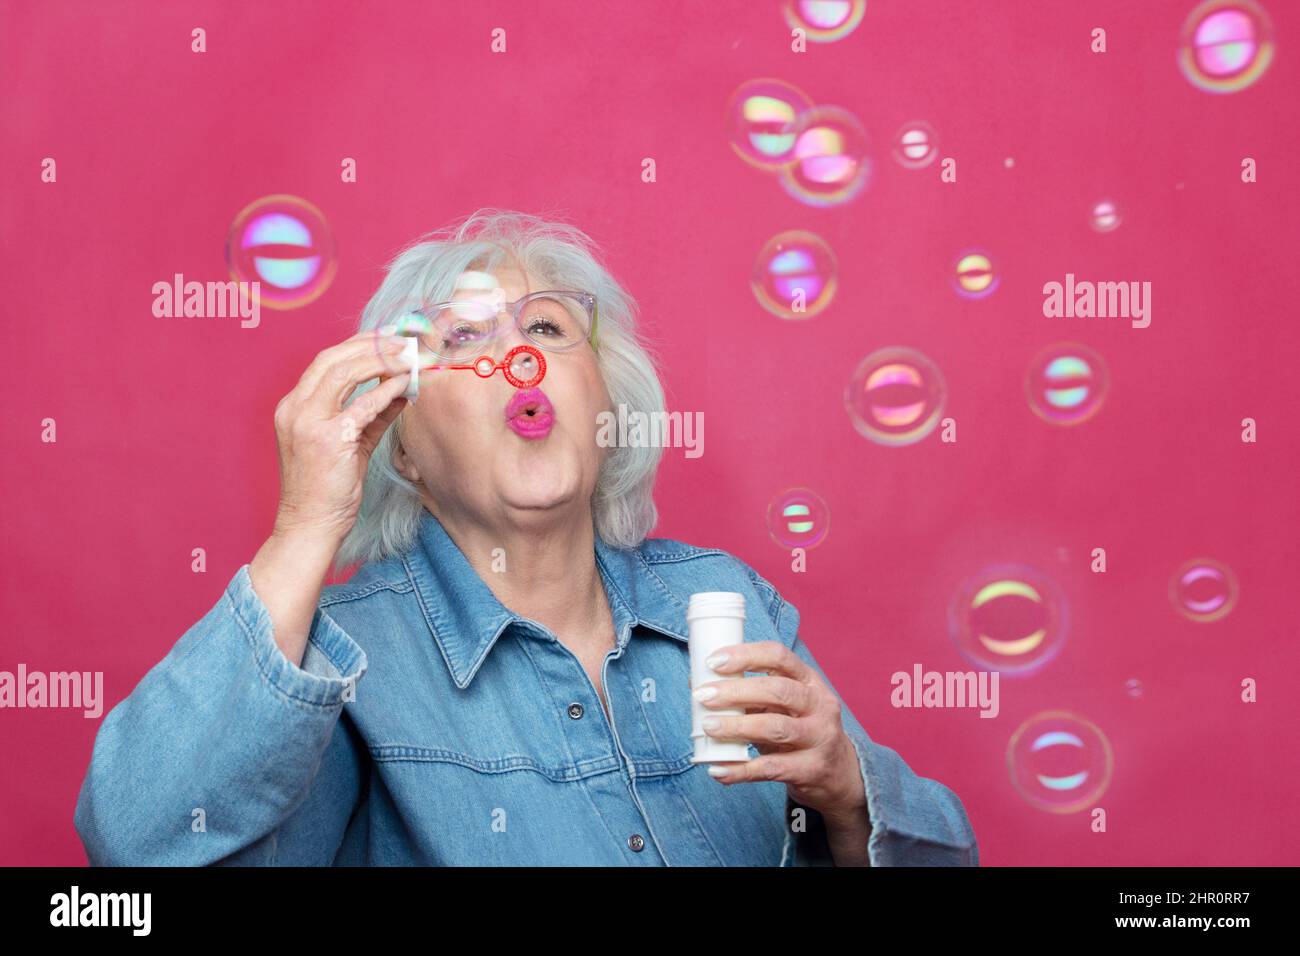 grey haired senior woman blowing soap bubbles on a plain background Stock Photo